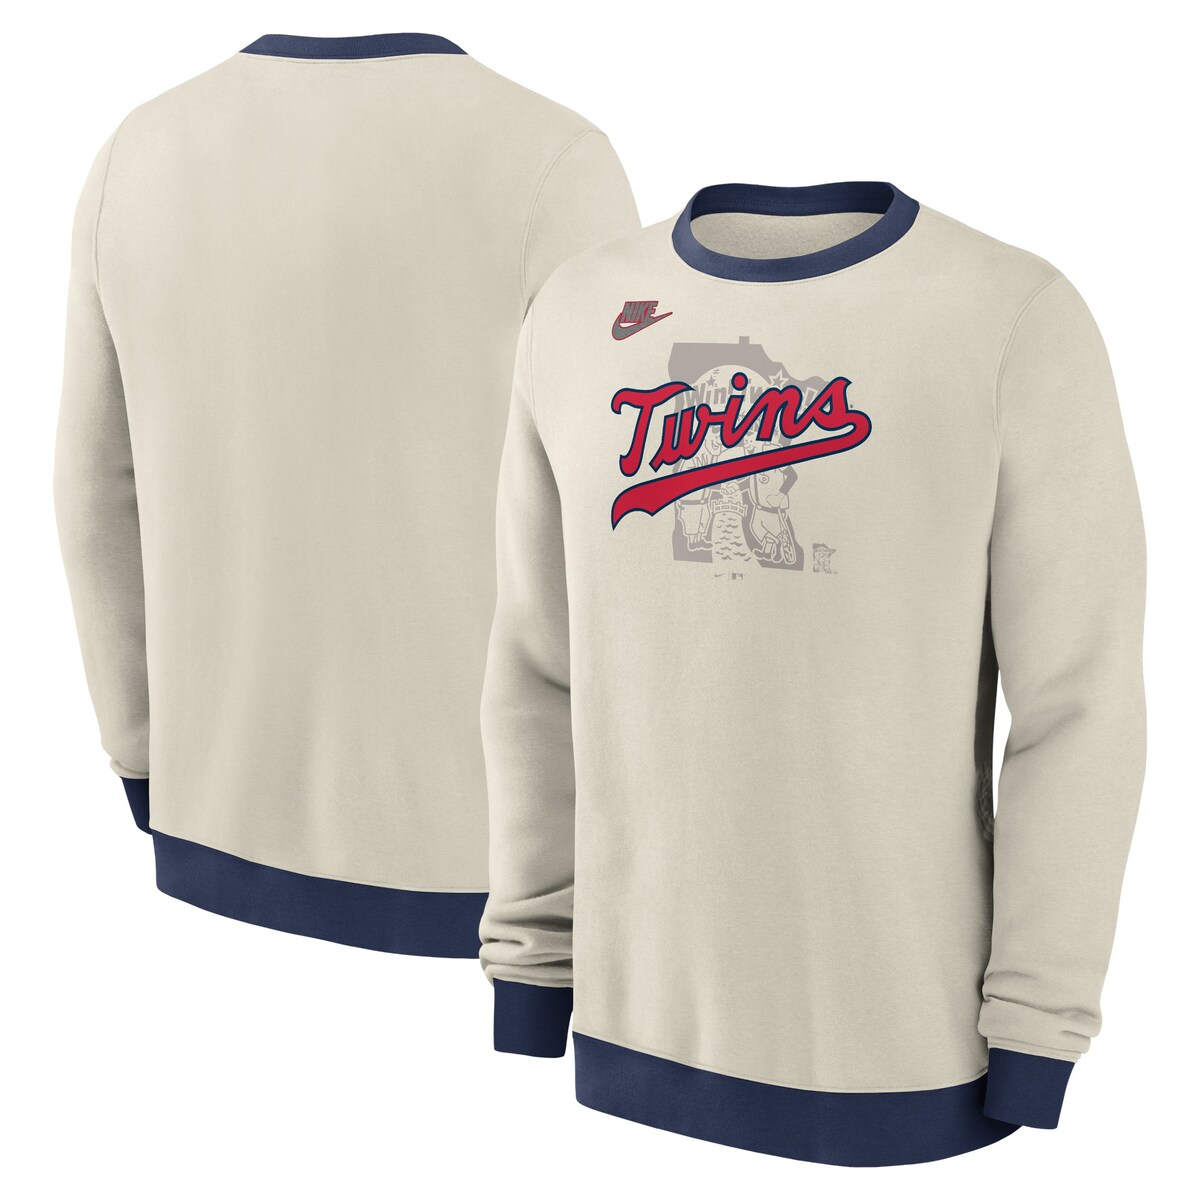 The Men's Nike Cream Minnesota Twins Cooperstown Collection Fleece Pullover Sweatshirt is the perfect way to show your support for the Minnesota Twins. Made from a soft and comfortable cotton-polyester blend, this midweight sweatshirt is perfect for moderate temperatures. The screen-printed graphics feature the iconic Minnesota Twins logo, so you can proudly display your team spirit wherever you go.PulloverMaterial: 80% Cotton/20% PolyesterMidweight sweatshirt suitable for moderate temperaturesLong sleeveOfficially licensedMachine wash, tumble dry lowImportedScreen print graphicsCrew neckBrand: Nike